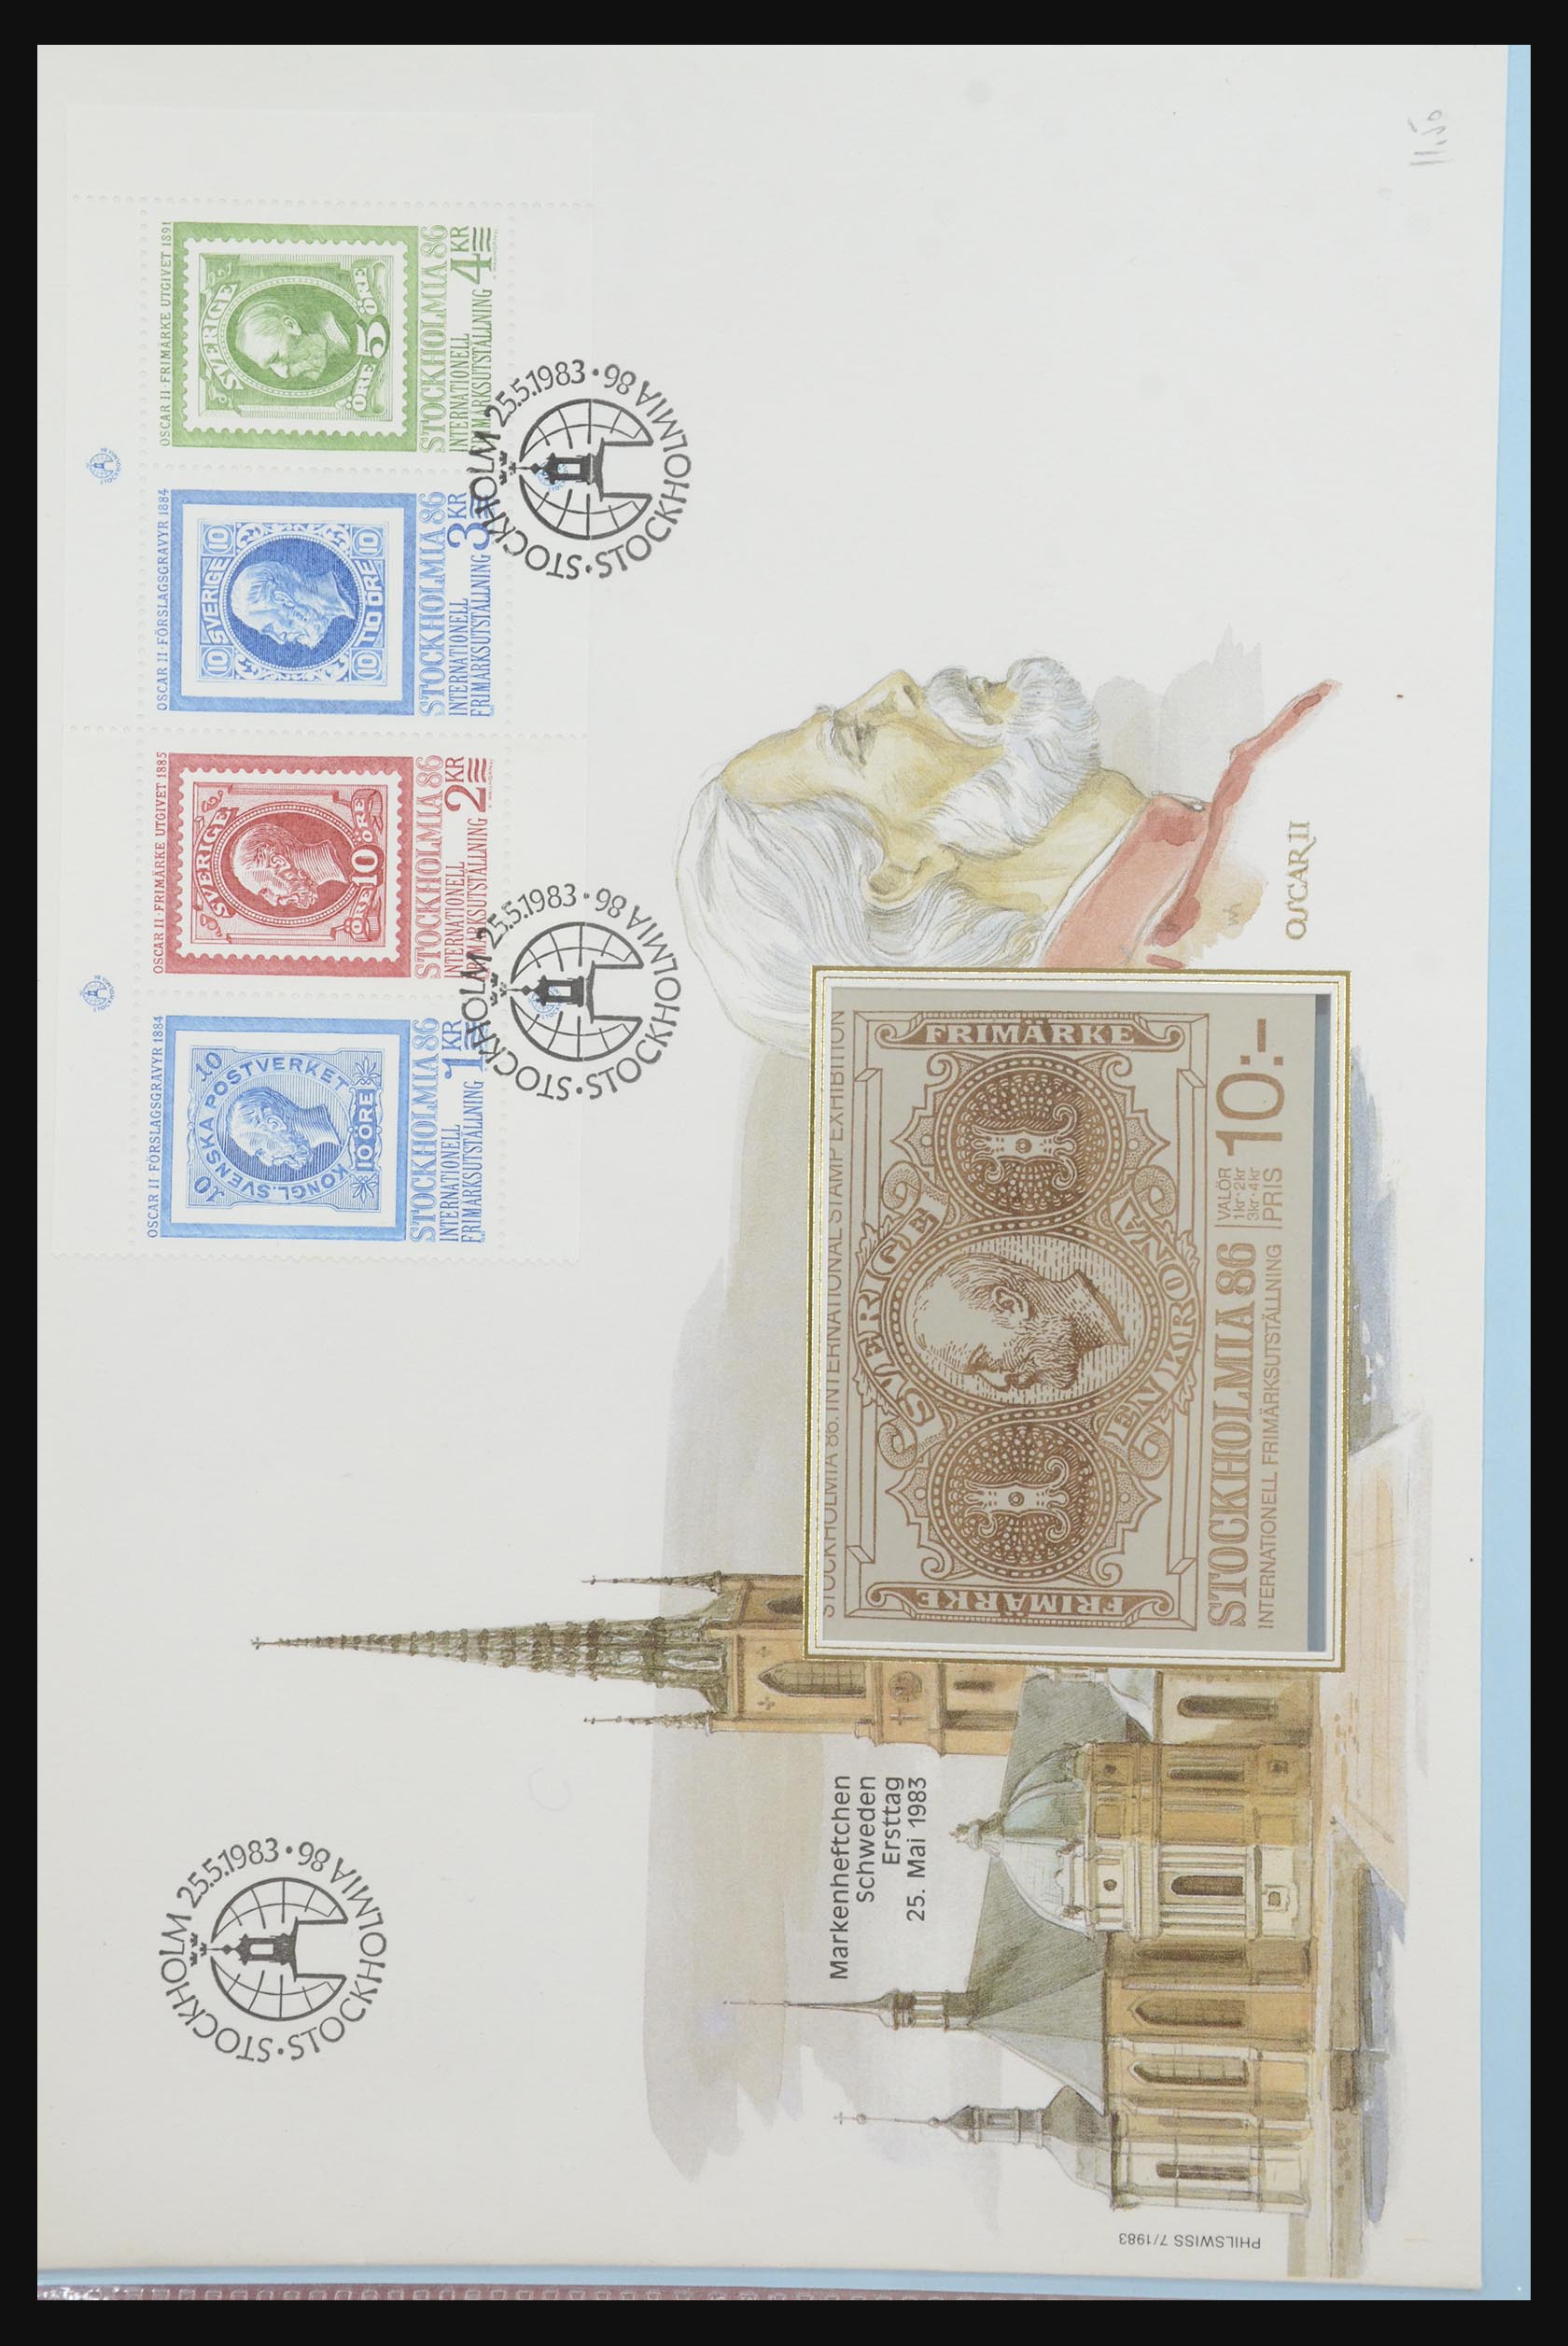 31915 390 - 31915 Western Europe souvenir sheets and stamp booklets on FDC.